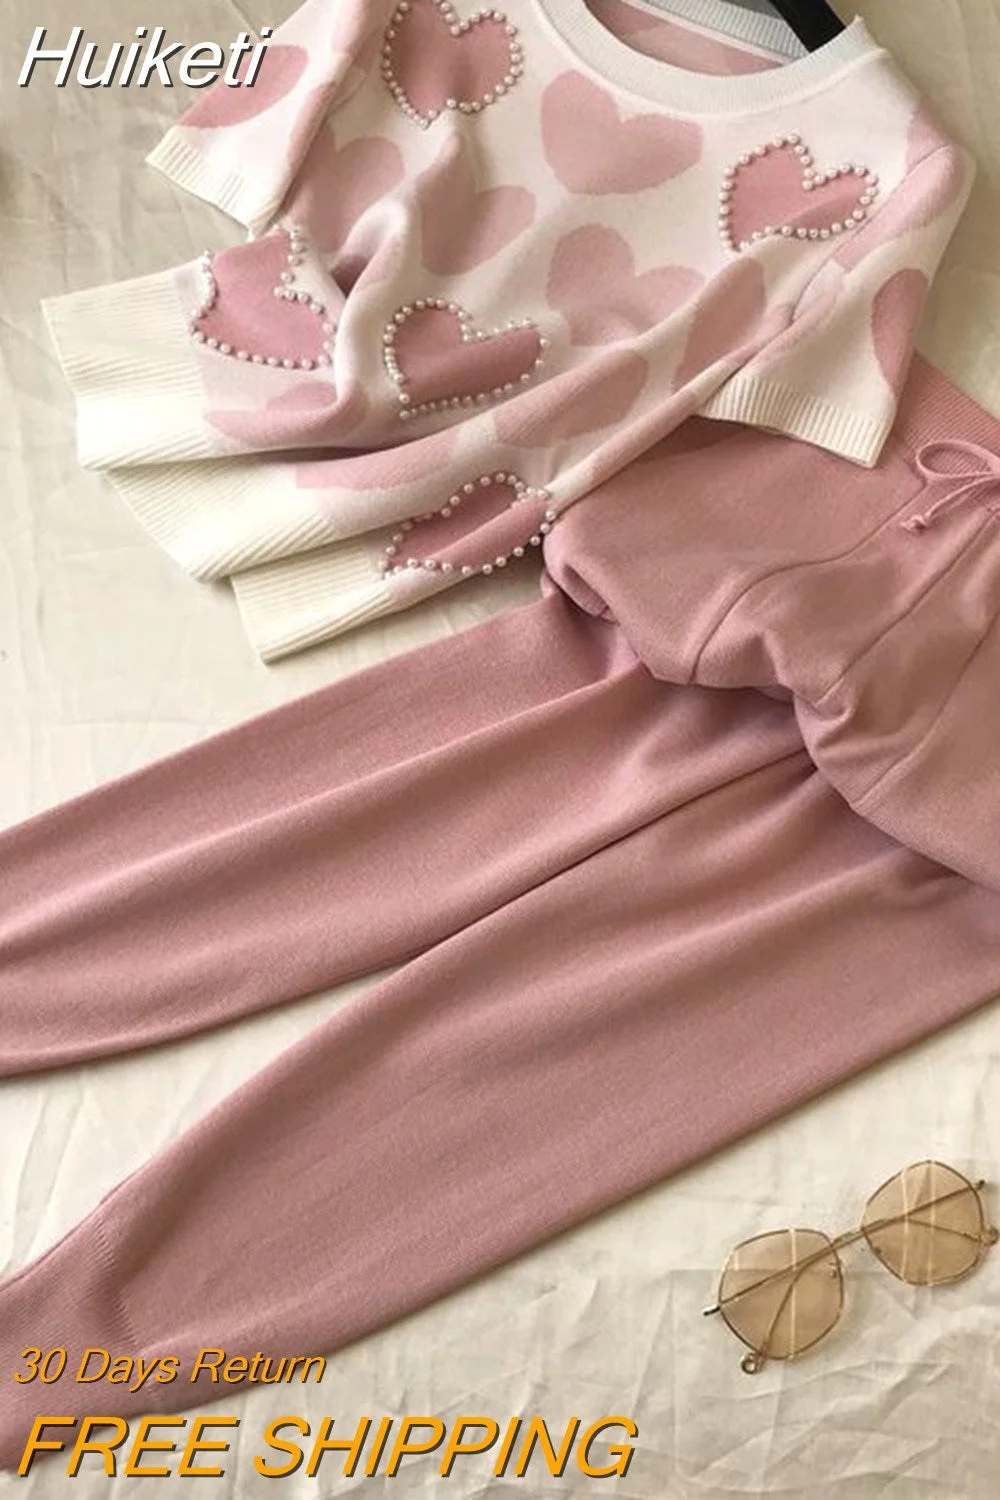 Huiketi Love Printing Knitted 2 Piece Tracksuit Women Summer Short Sleeve Beading Sweater Female Tops+pants Pink Casual Tracksuit